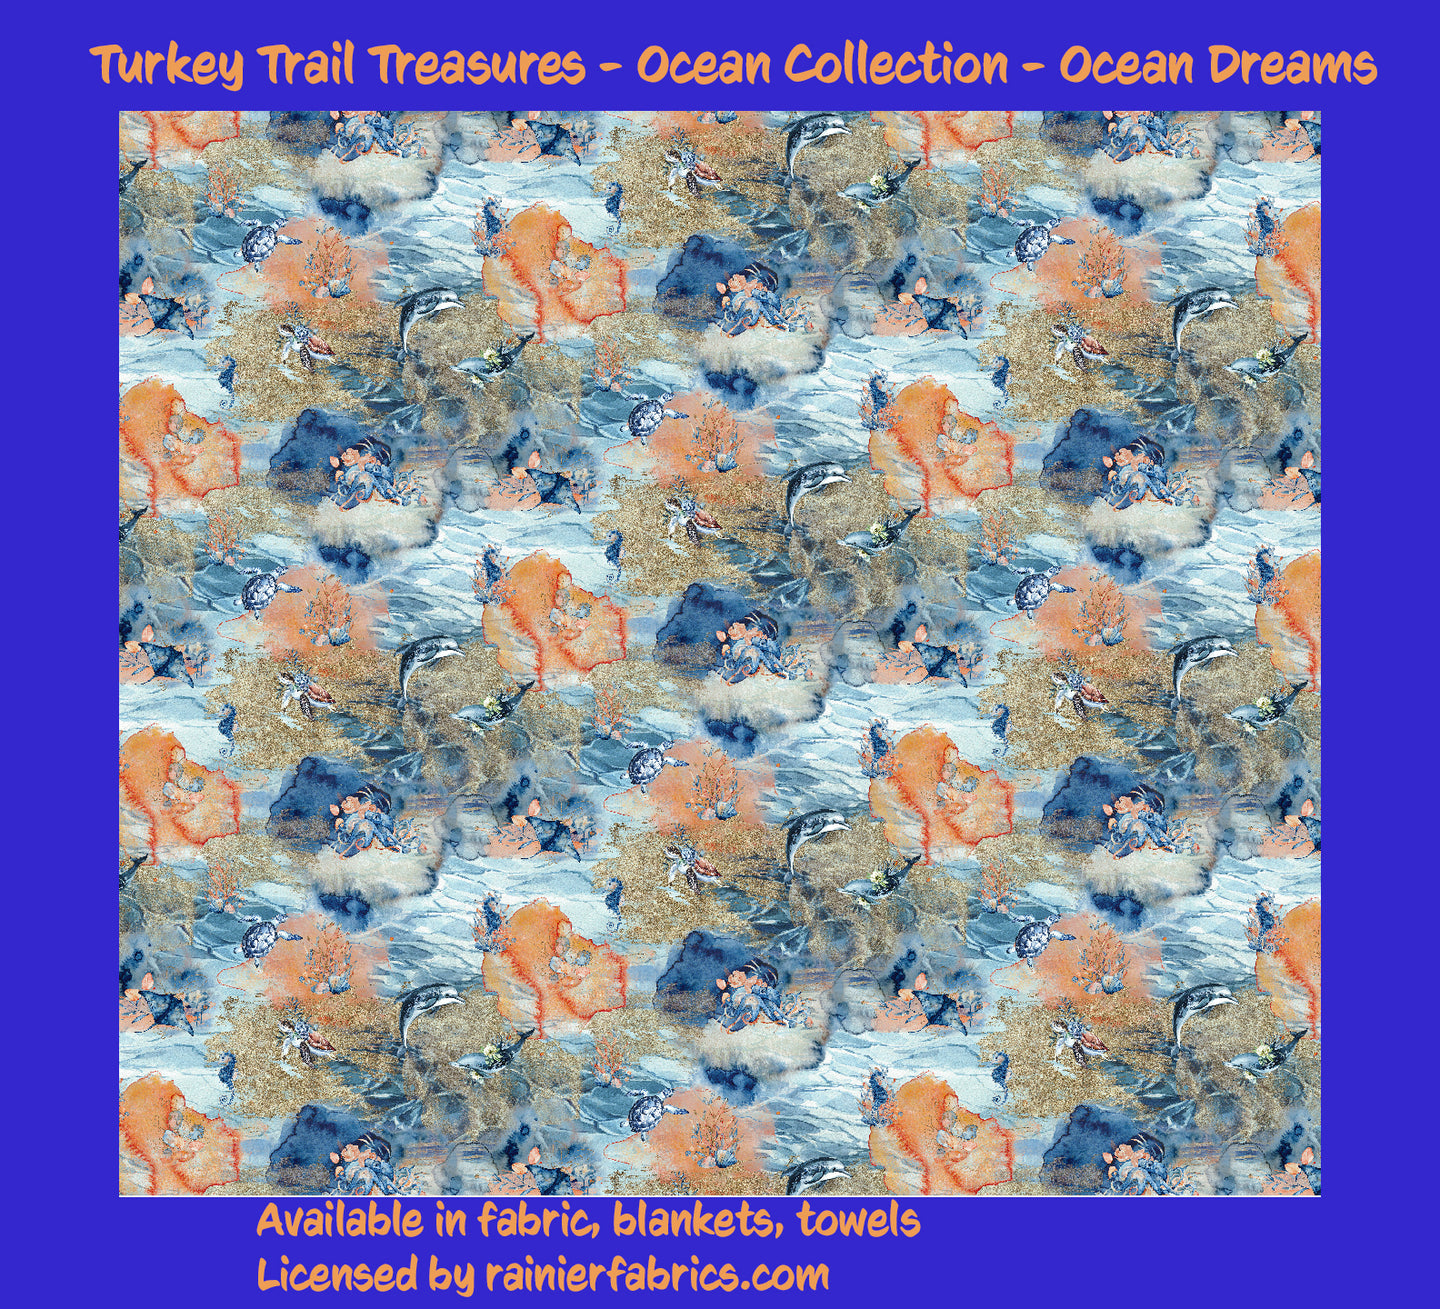 Ocean Collection - Ocean Dreams from Turkey Trail Treasures - 2-5 day turnaround - Order by 1/2 yard; Description of bases below